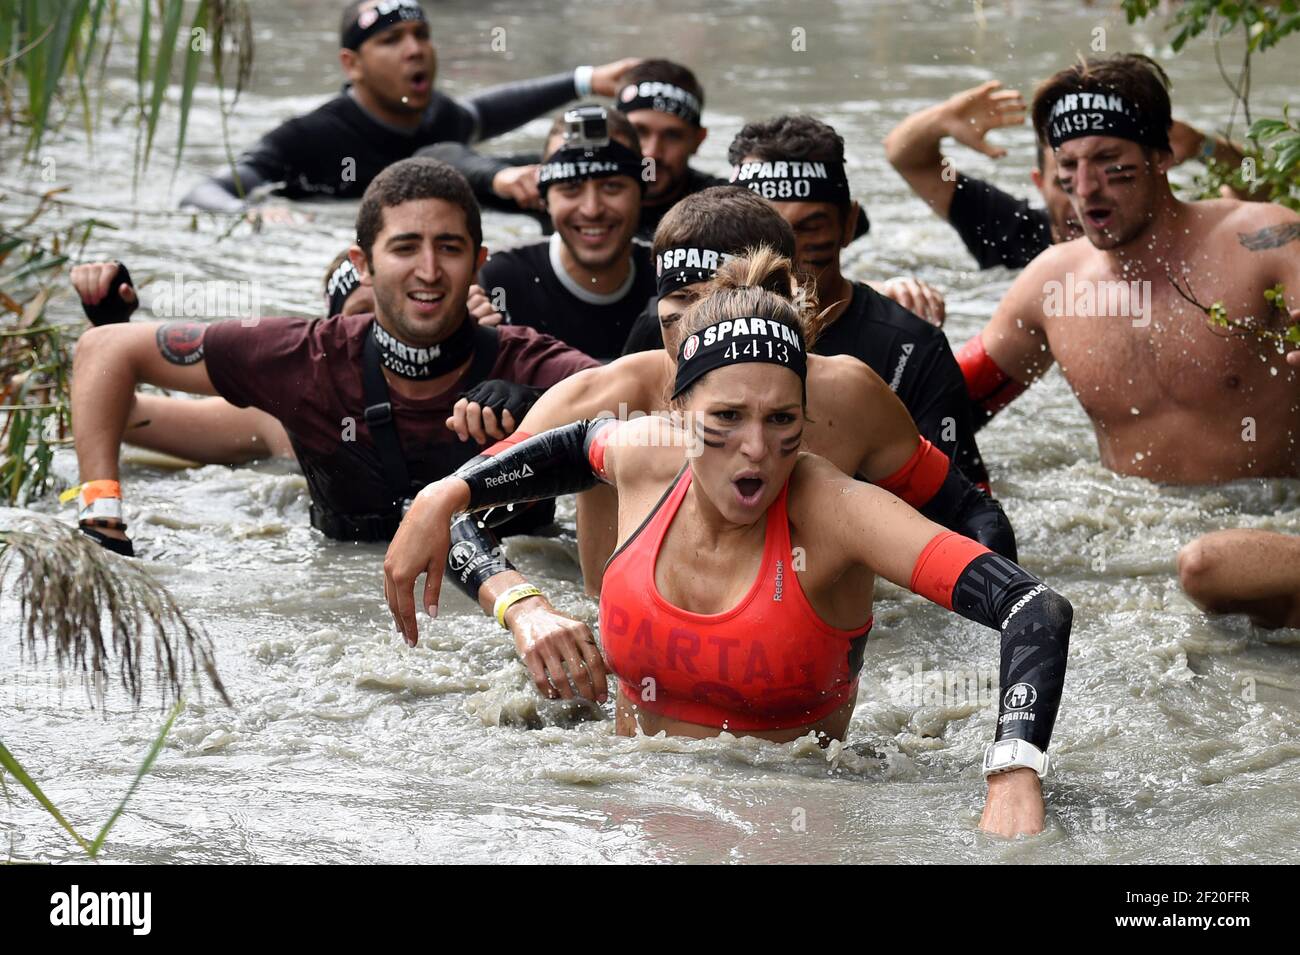 The Miss France 2011 Laury Thilleman competes during the Reebok Spartan Race  in Jablines, on September 19, 2015. The Spartan Race is a race in the mud  with multiple obstacles. Photo Philippe